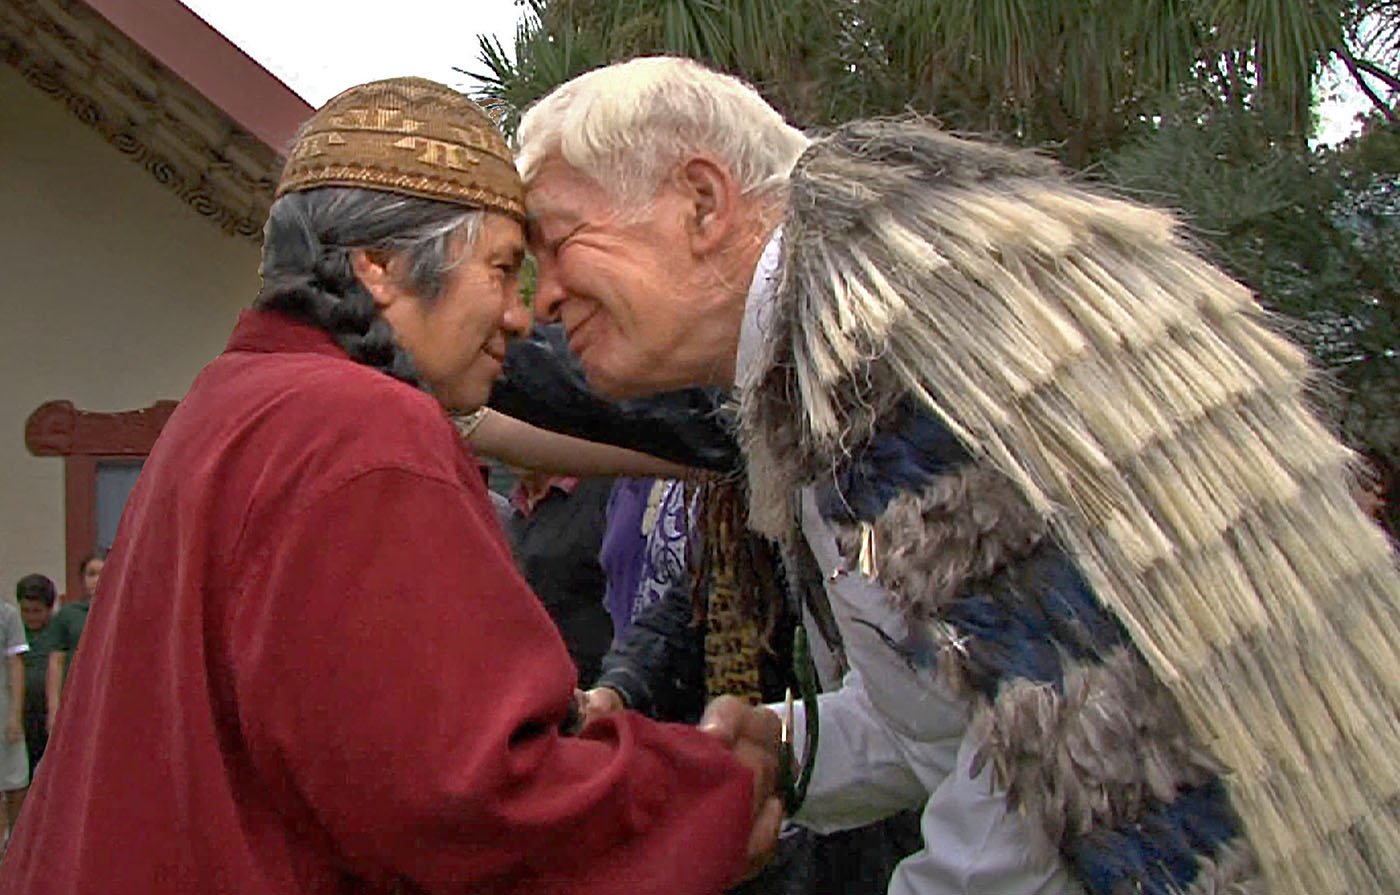  Chief Caleen Sisk at a Maori welcoming ceremony in New Zealand. 2010. Photo: Courtesy of Will Doolittle 